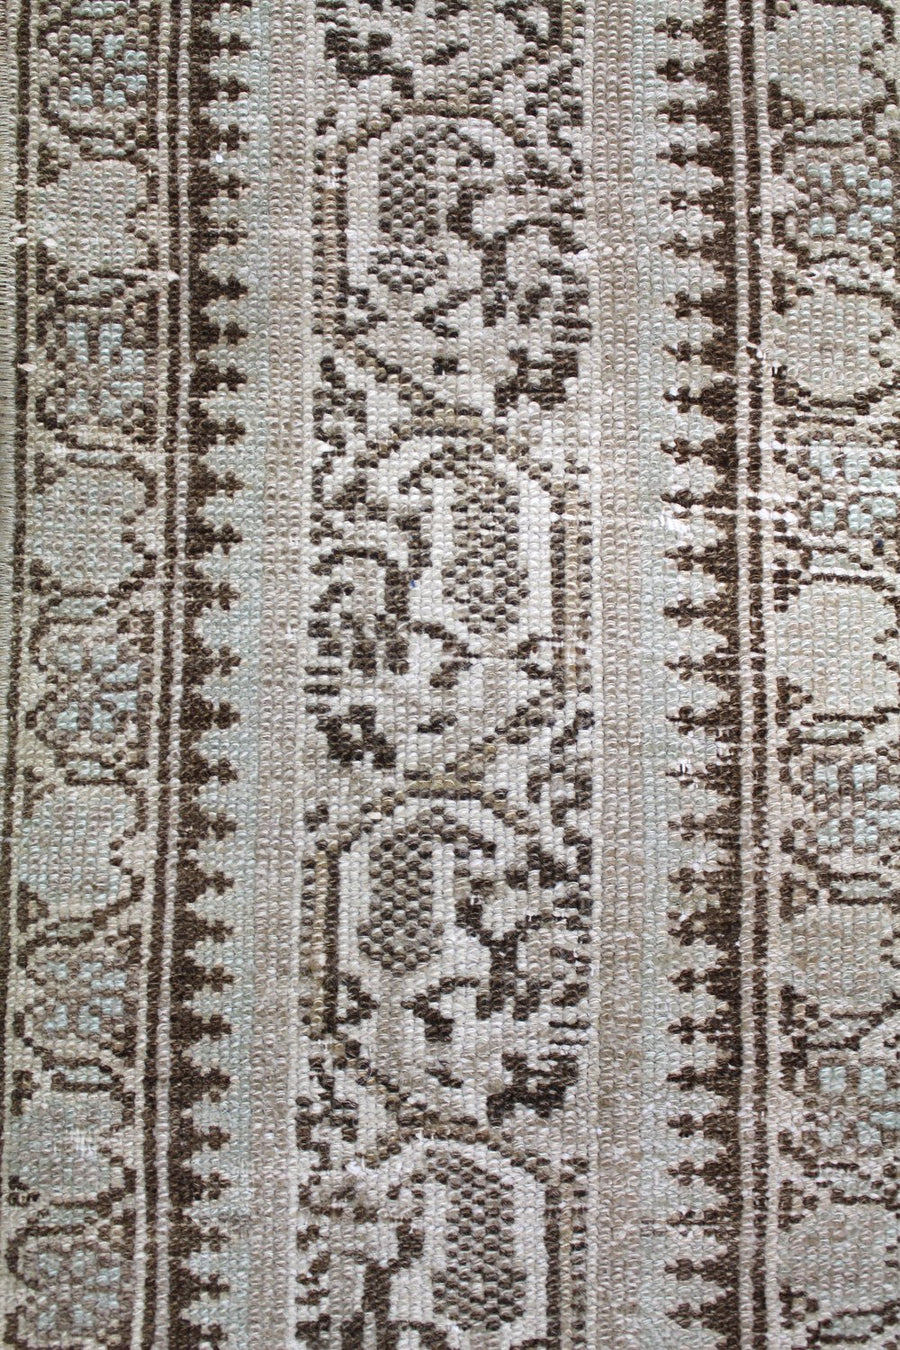 Malayer Handknotted Rug, J58813